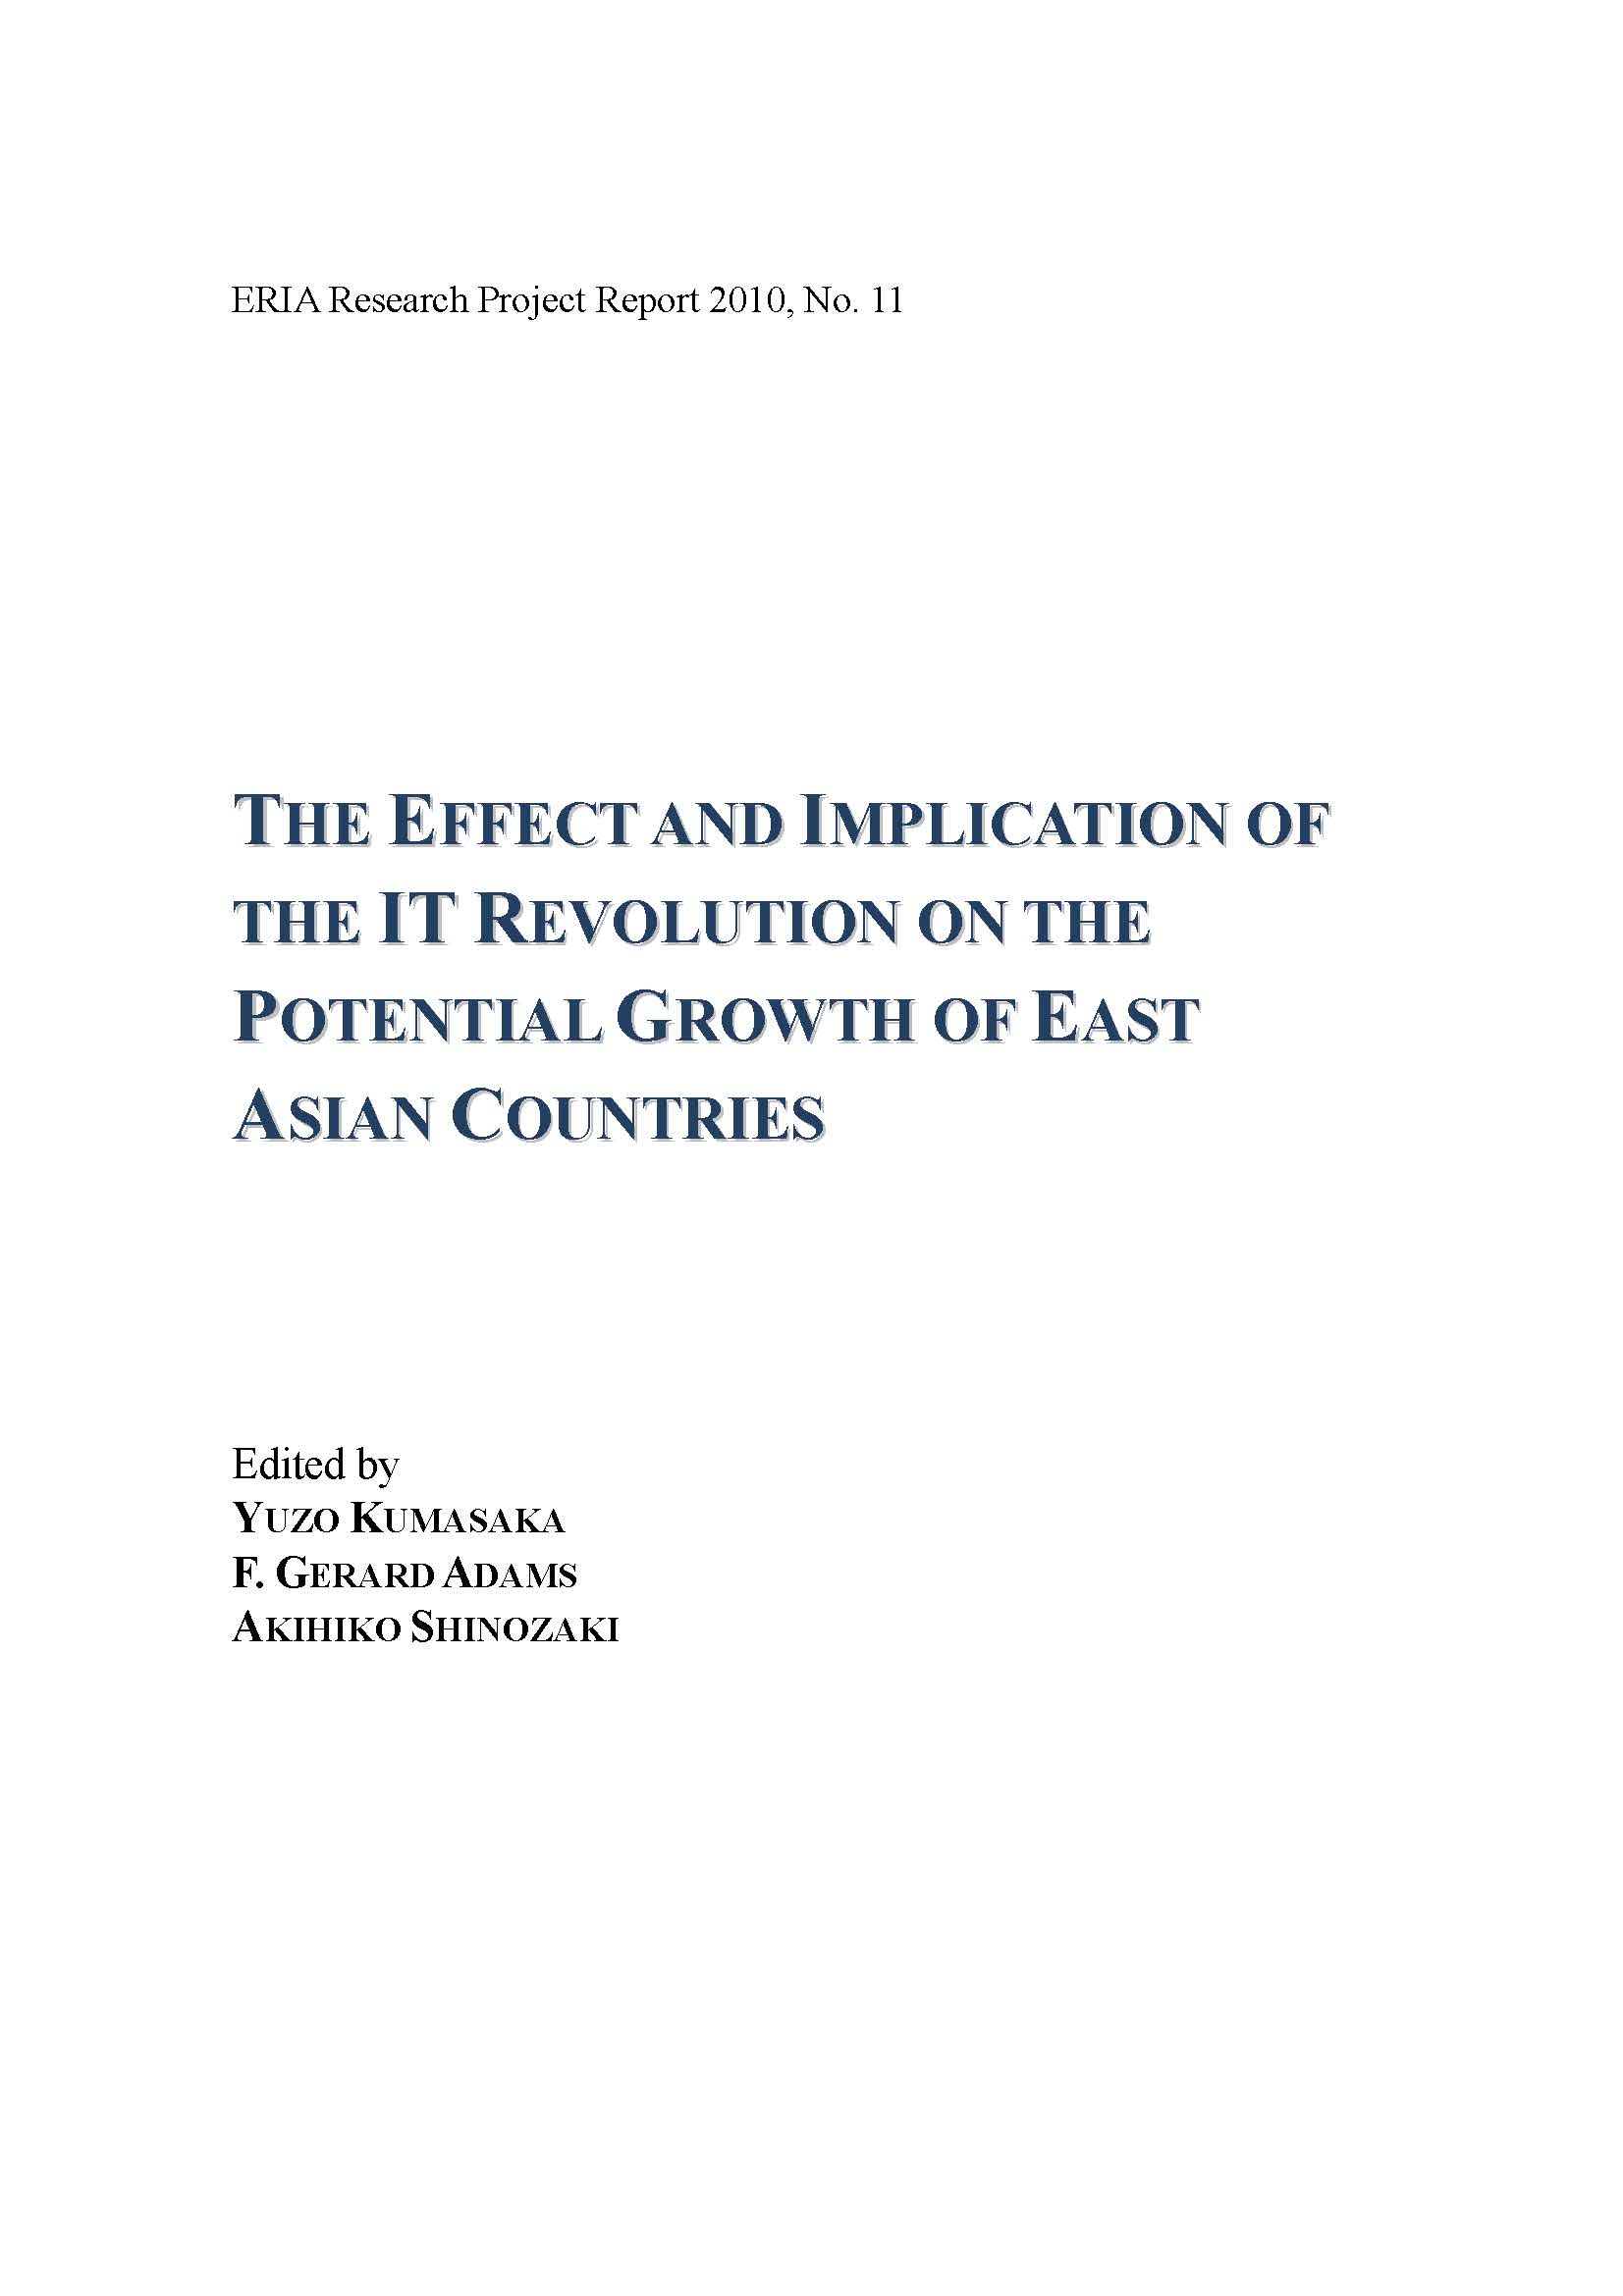 The Effect and Implication of the IT Revolution on the Potential Growth of East Asian Countries